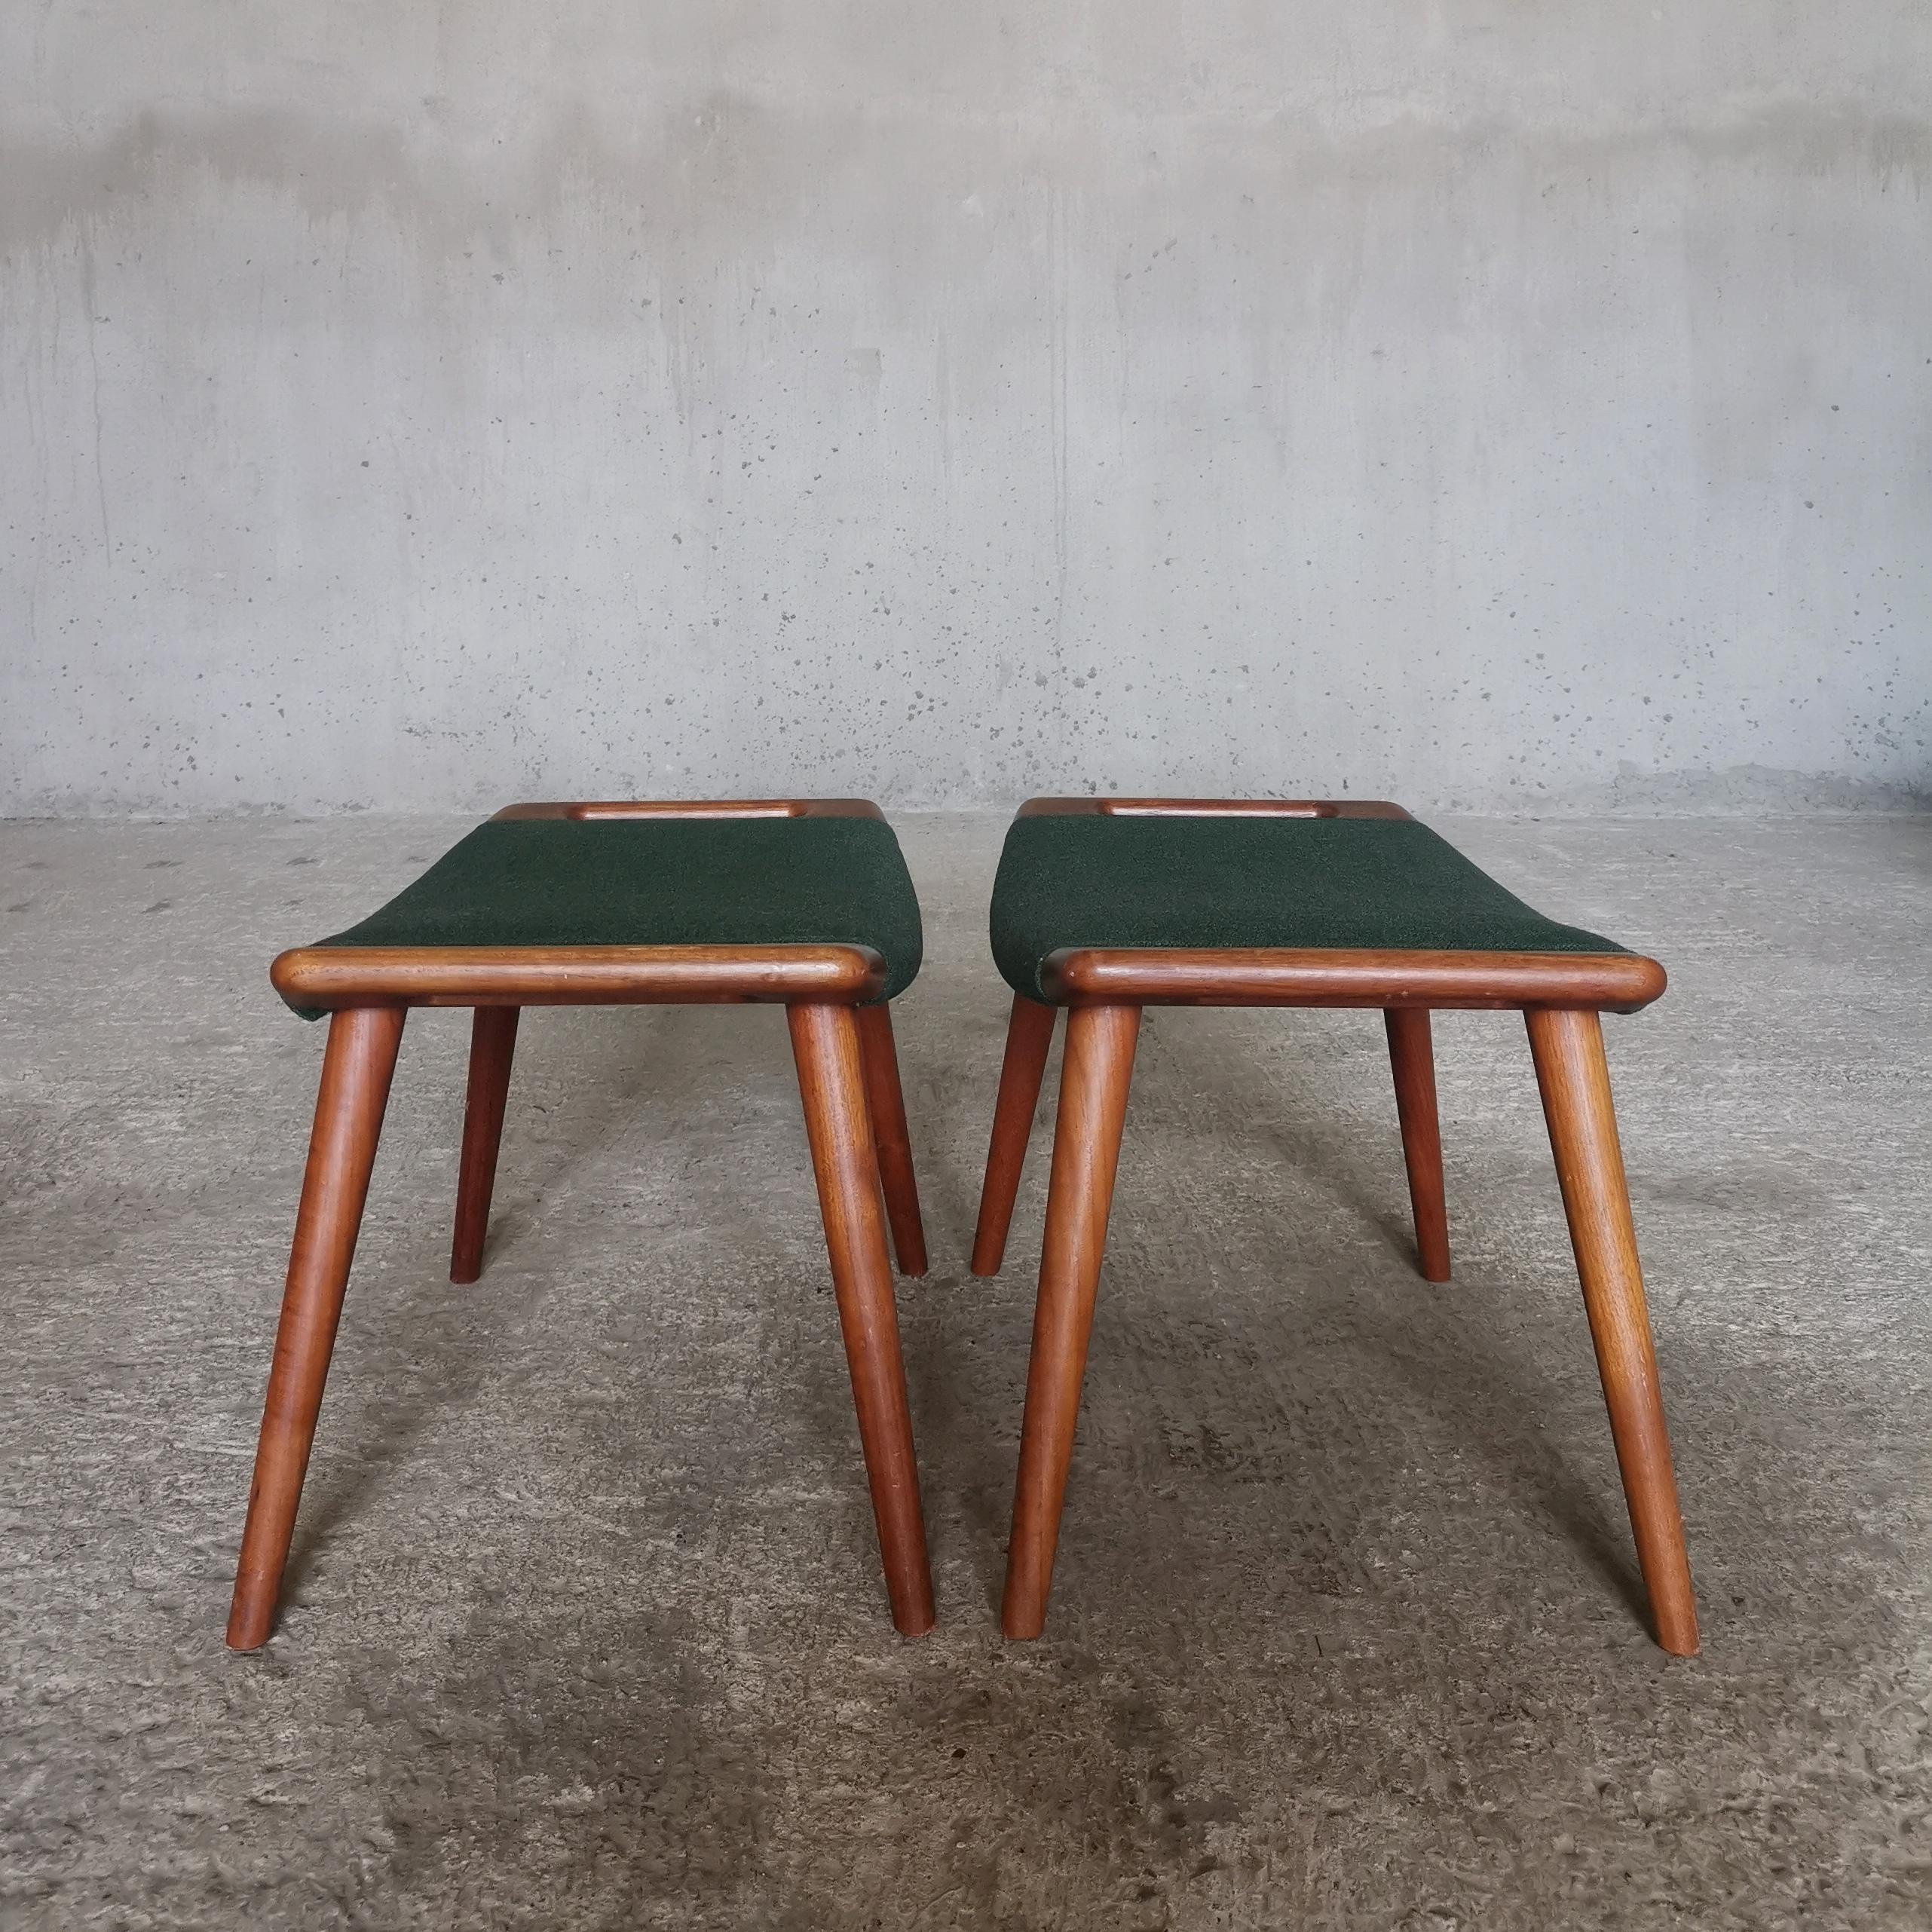 This pair of identical Papa Bear Ottomans AP-29 by Hans J. Wegner for A. P. Stolen, Denmark 1950s were acquired directly from the children of the original owner. 
Both ottomans have been preserved with the original seats in green wool kept in mint